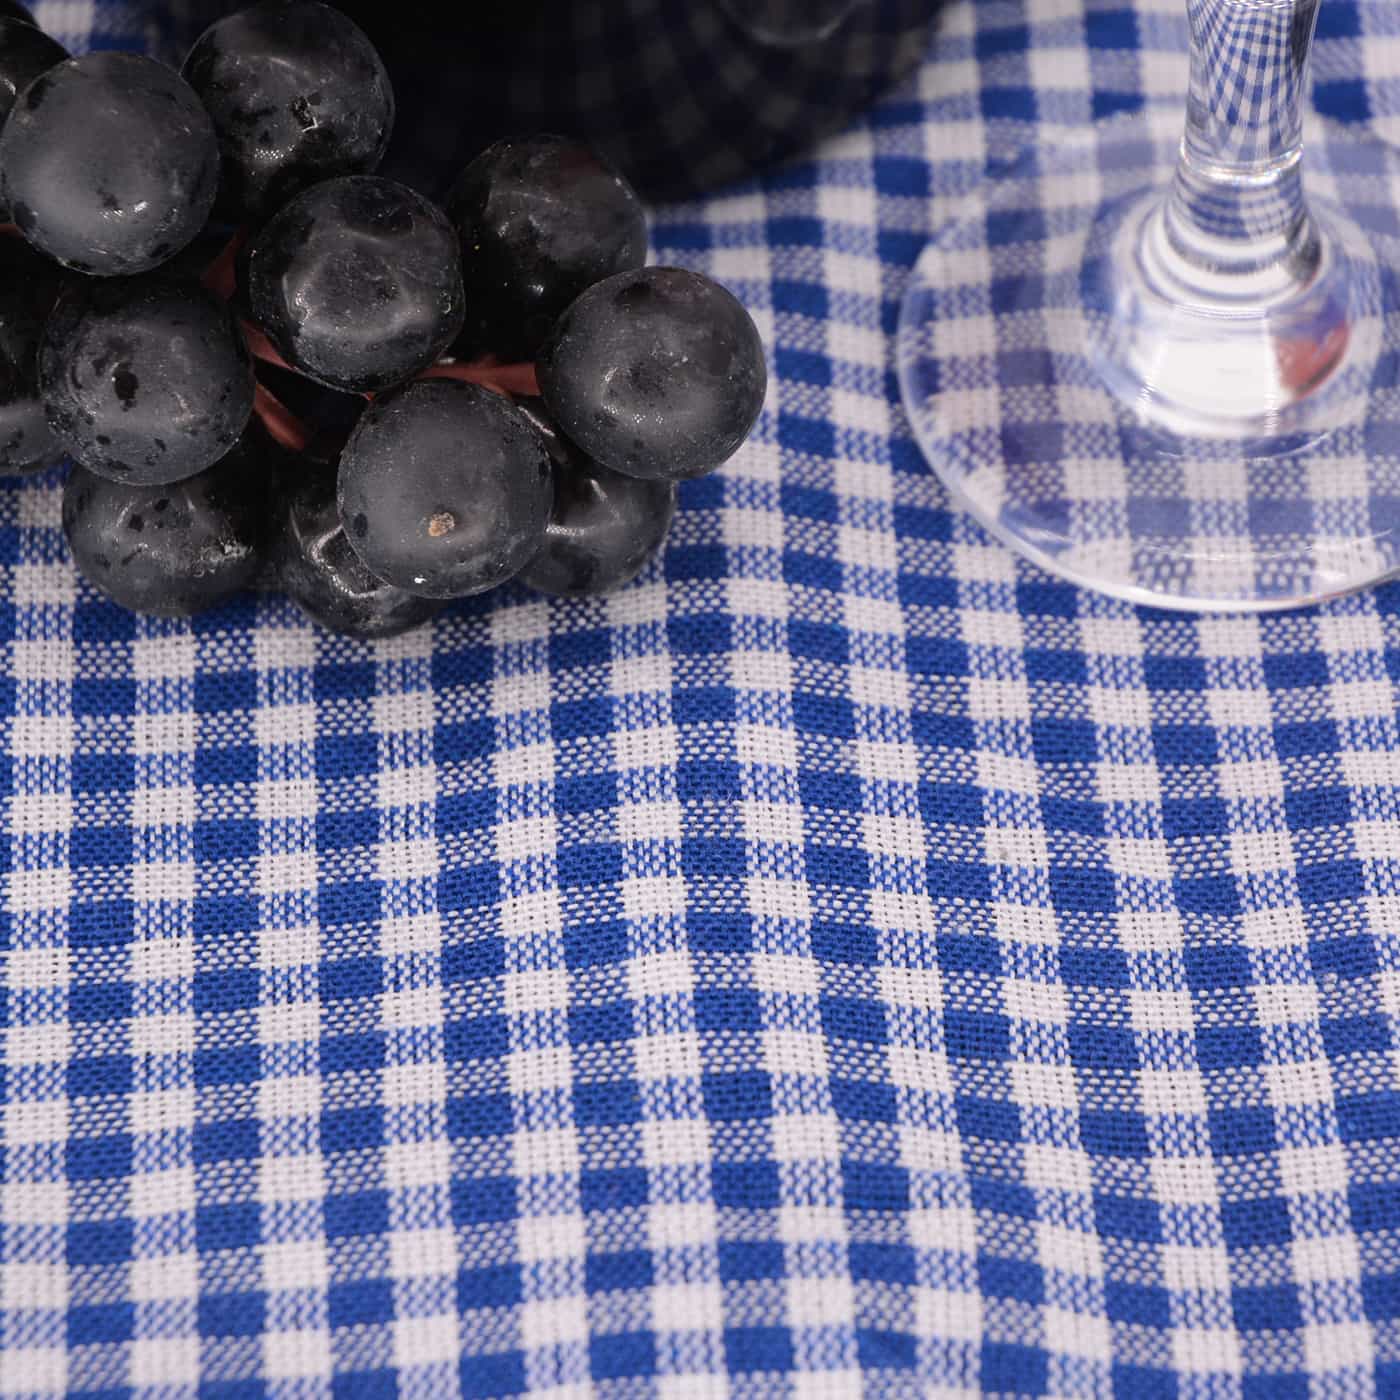 Waterproof picnic blanket blue and white gingham